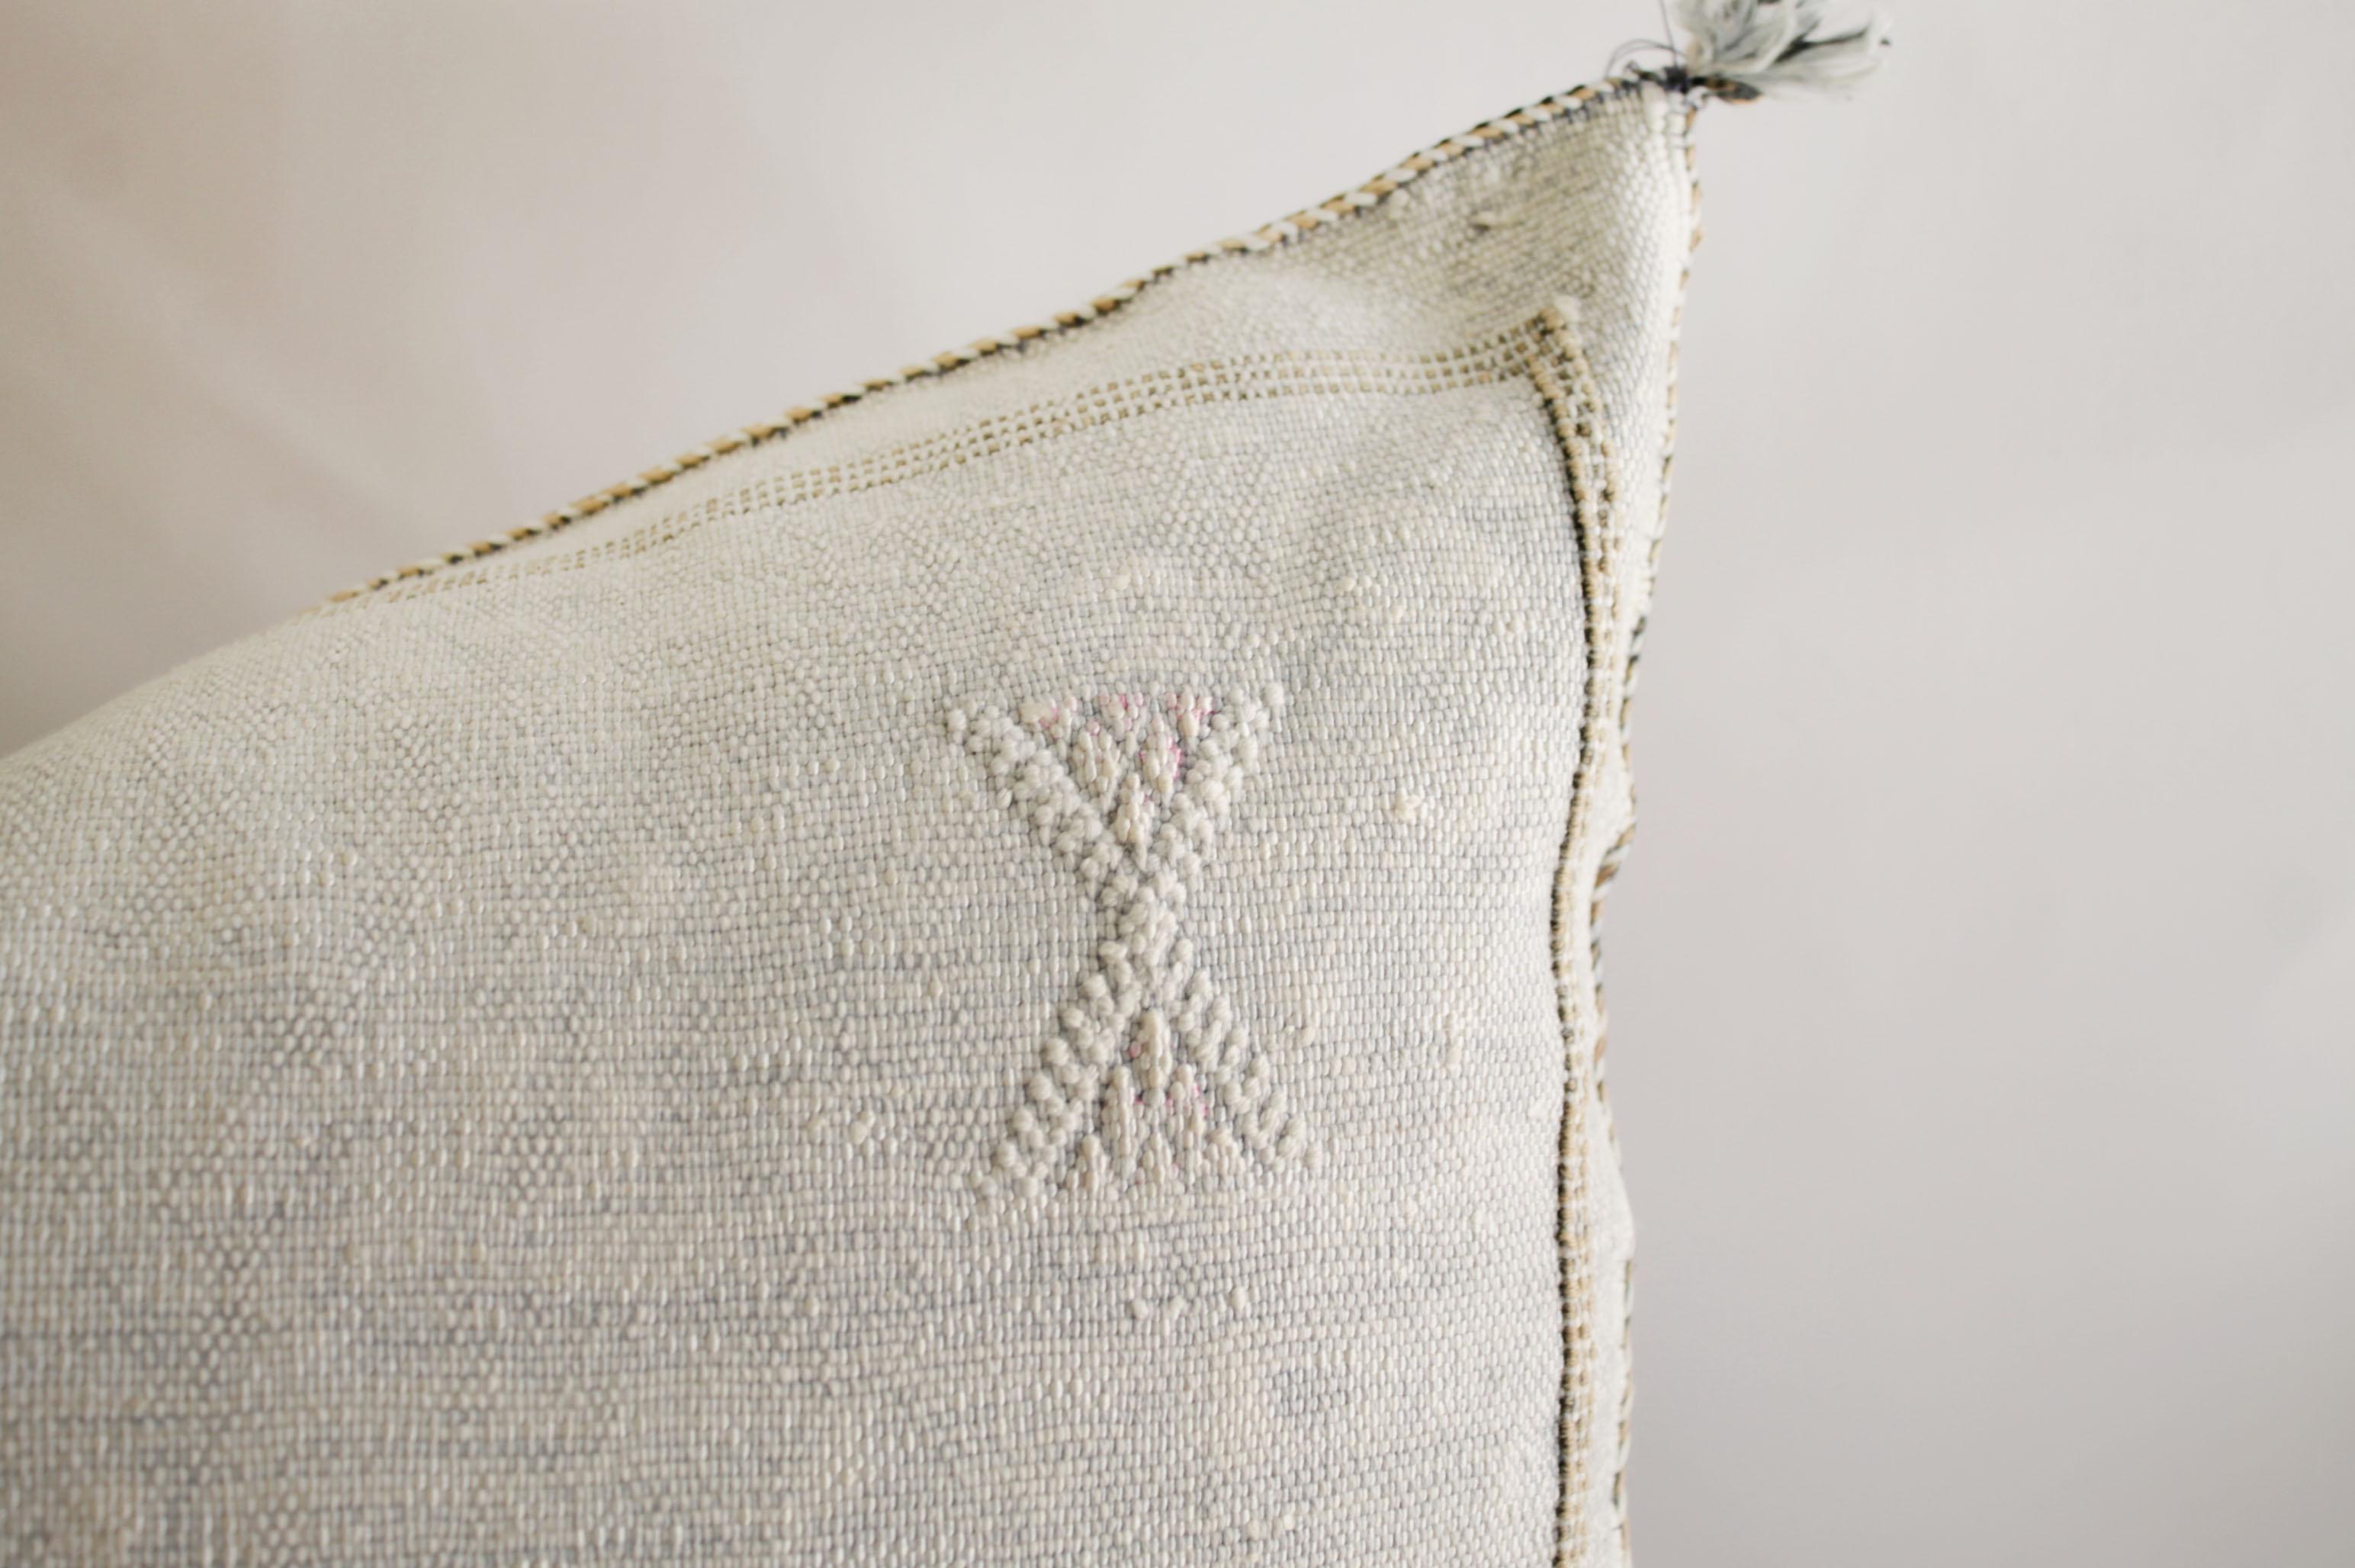 Hand-Woven Moroccan Handwoven Cactus Silk Pillow with Diamond Pattern